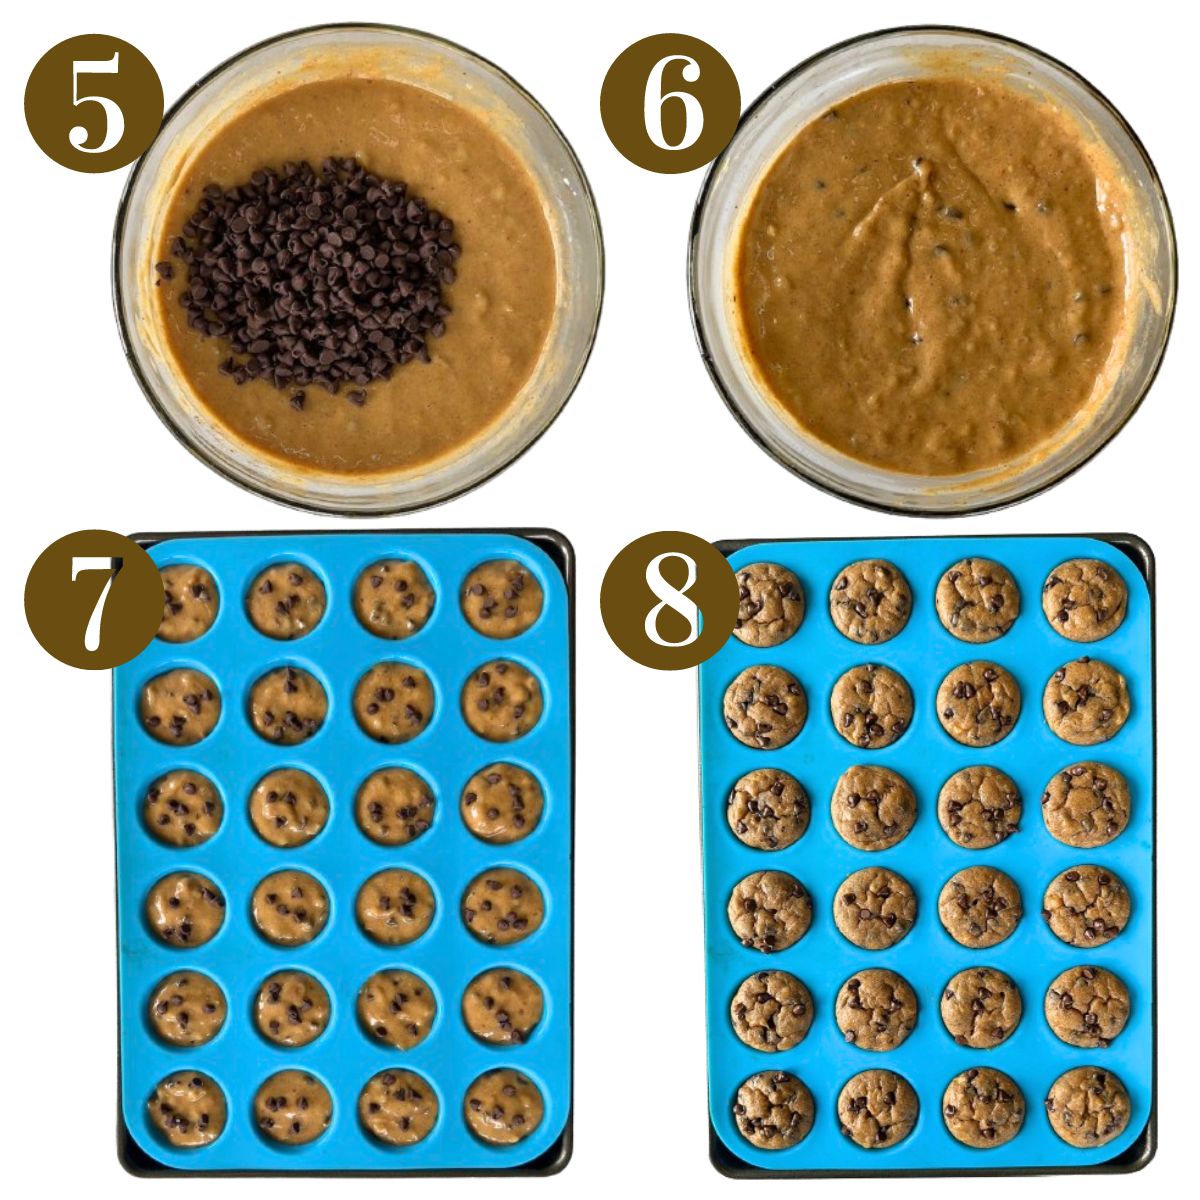 Steps to make peanut butter chocolate chips muffins.